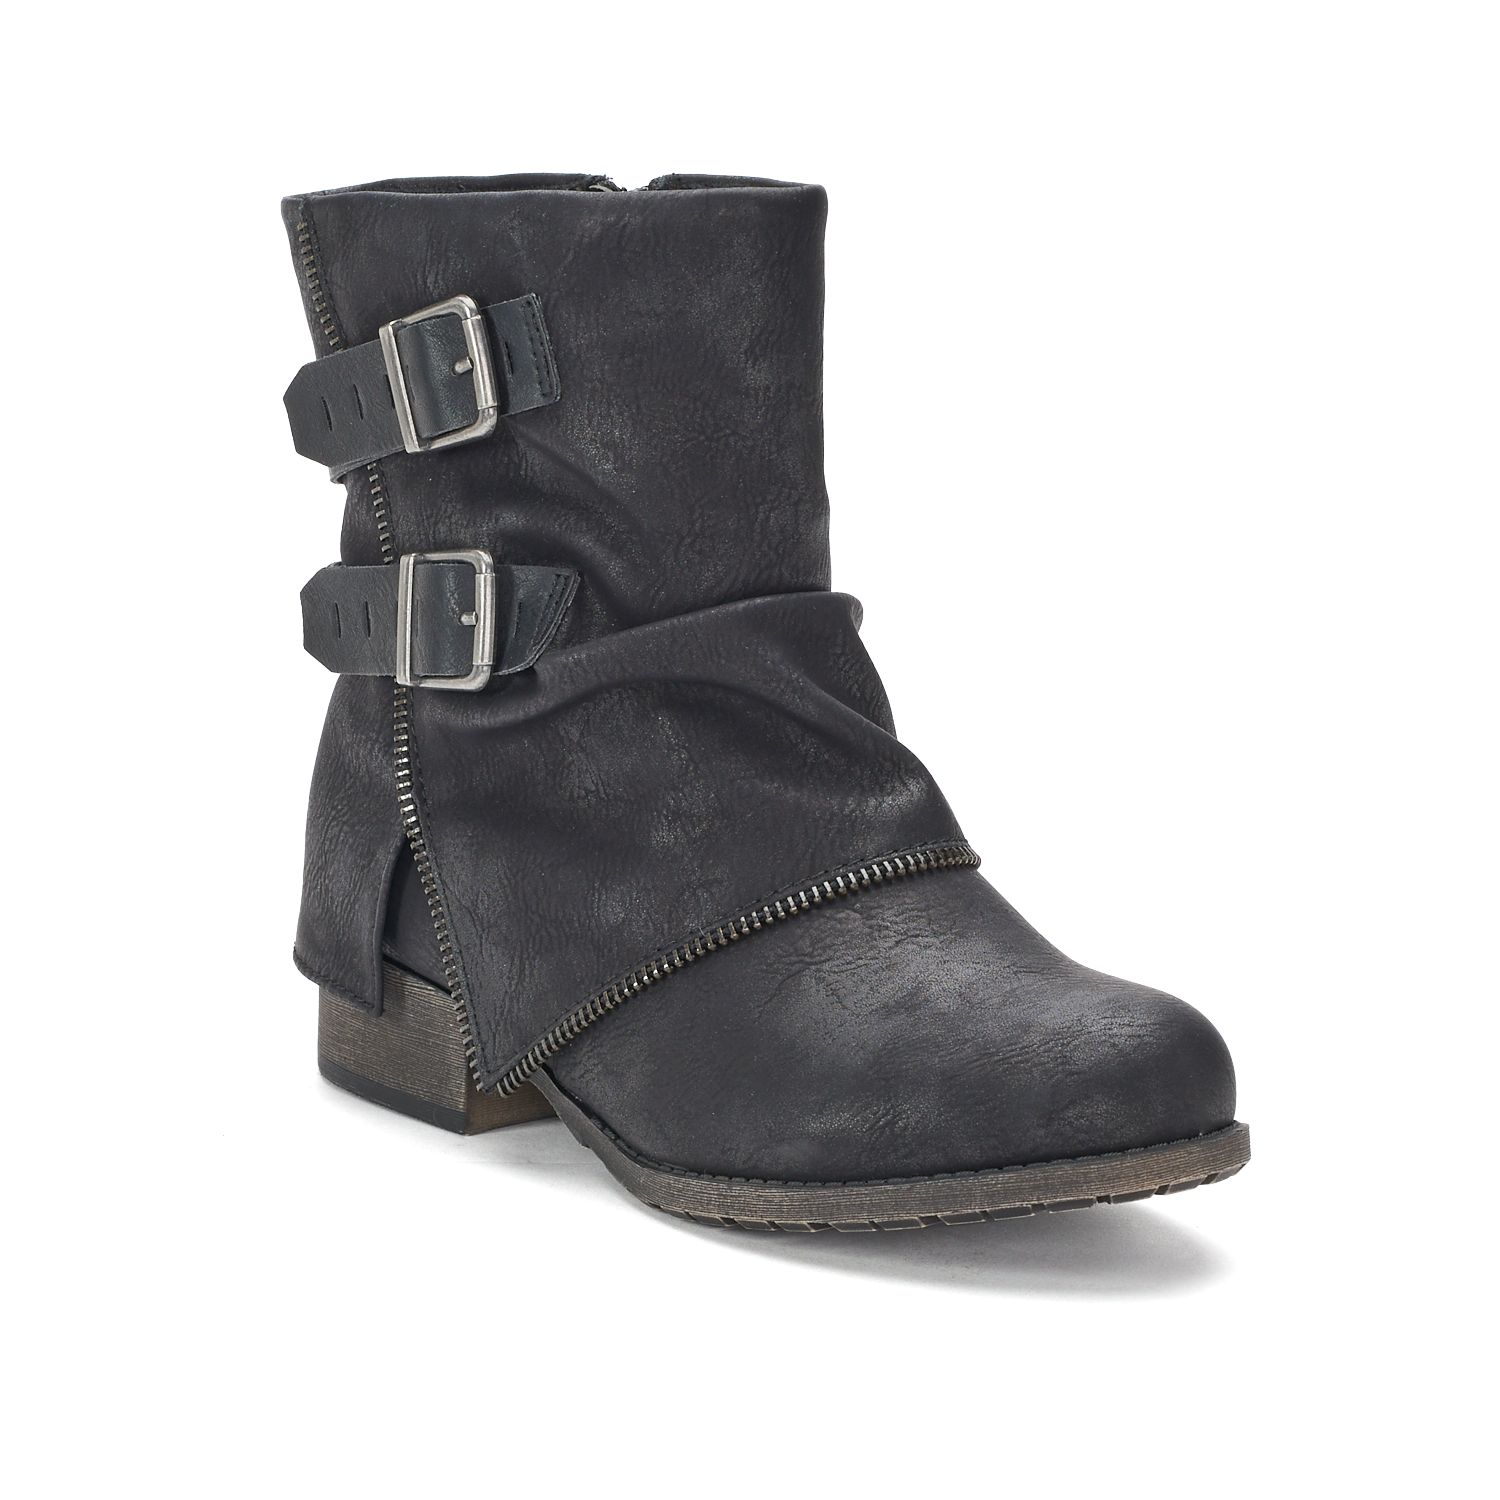 SO® Crabapple Women's Ankle Boots